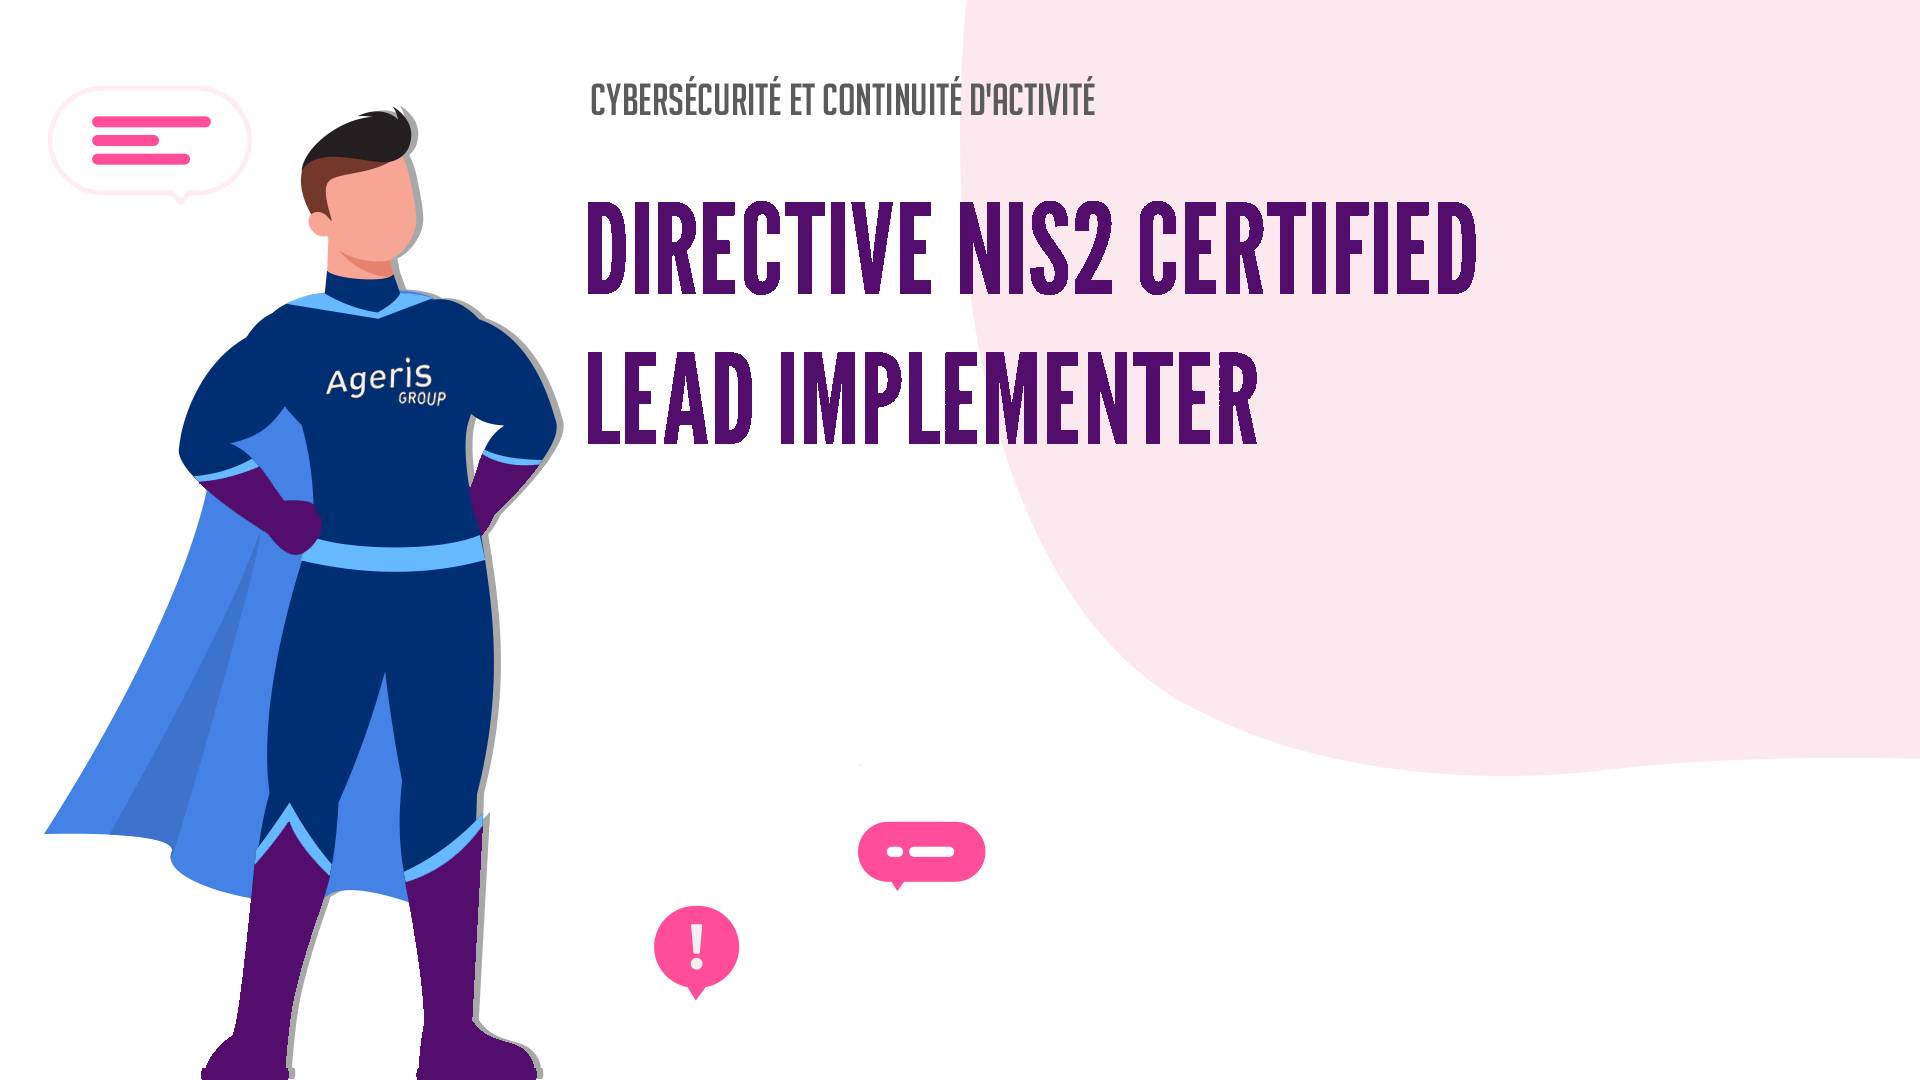 Formation Directive NIS2 Certified Lead Implementer